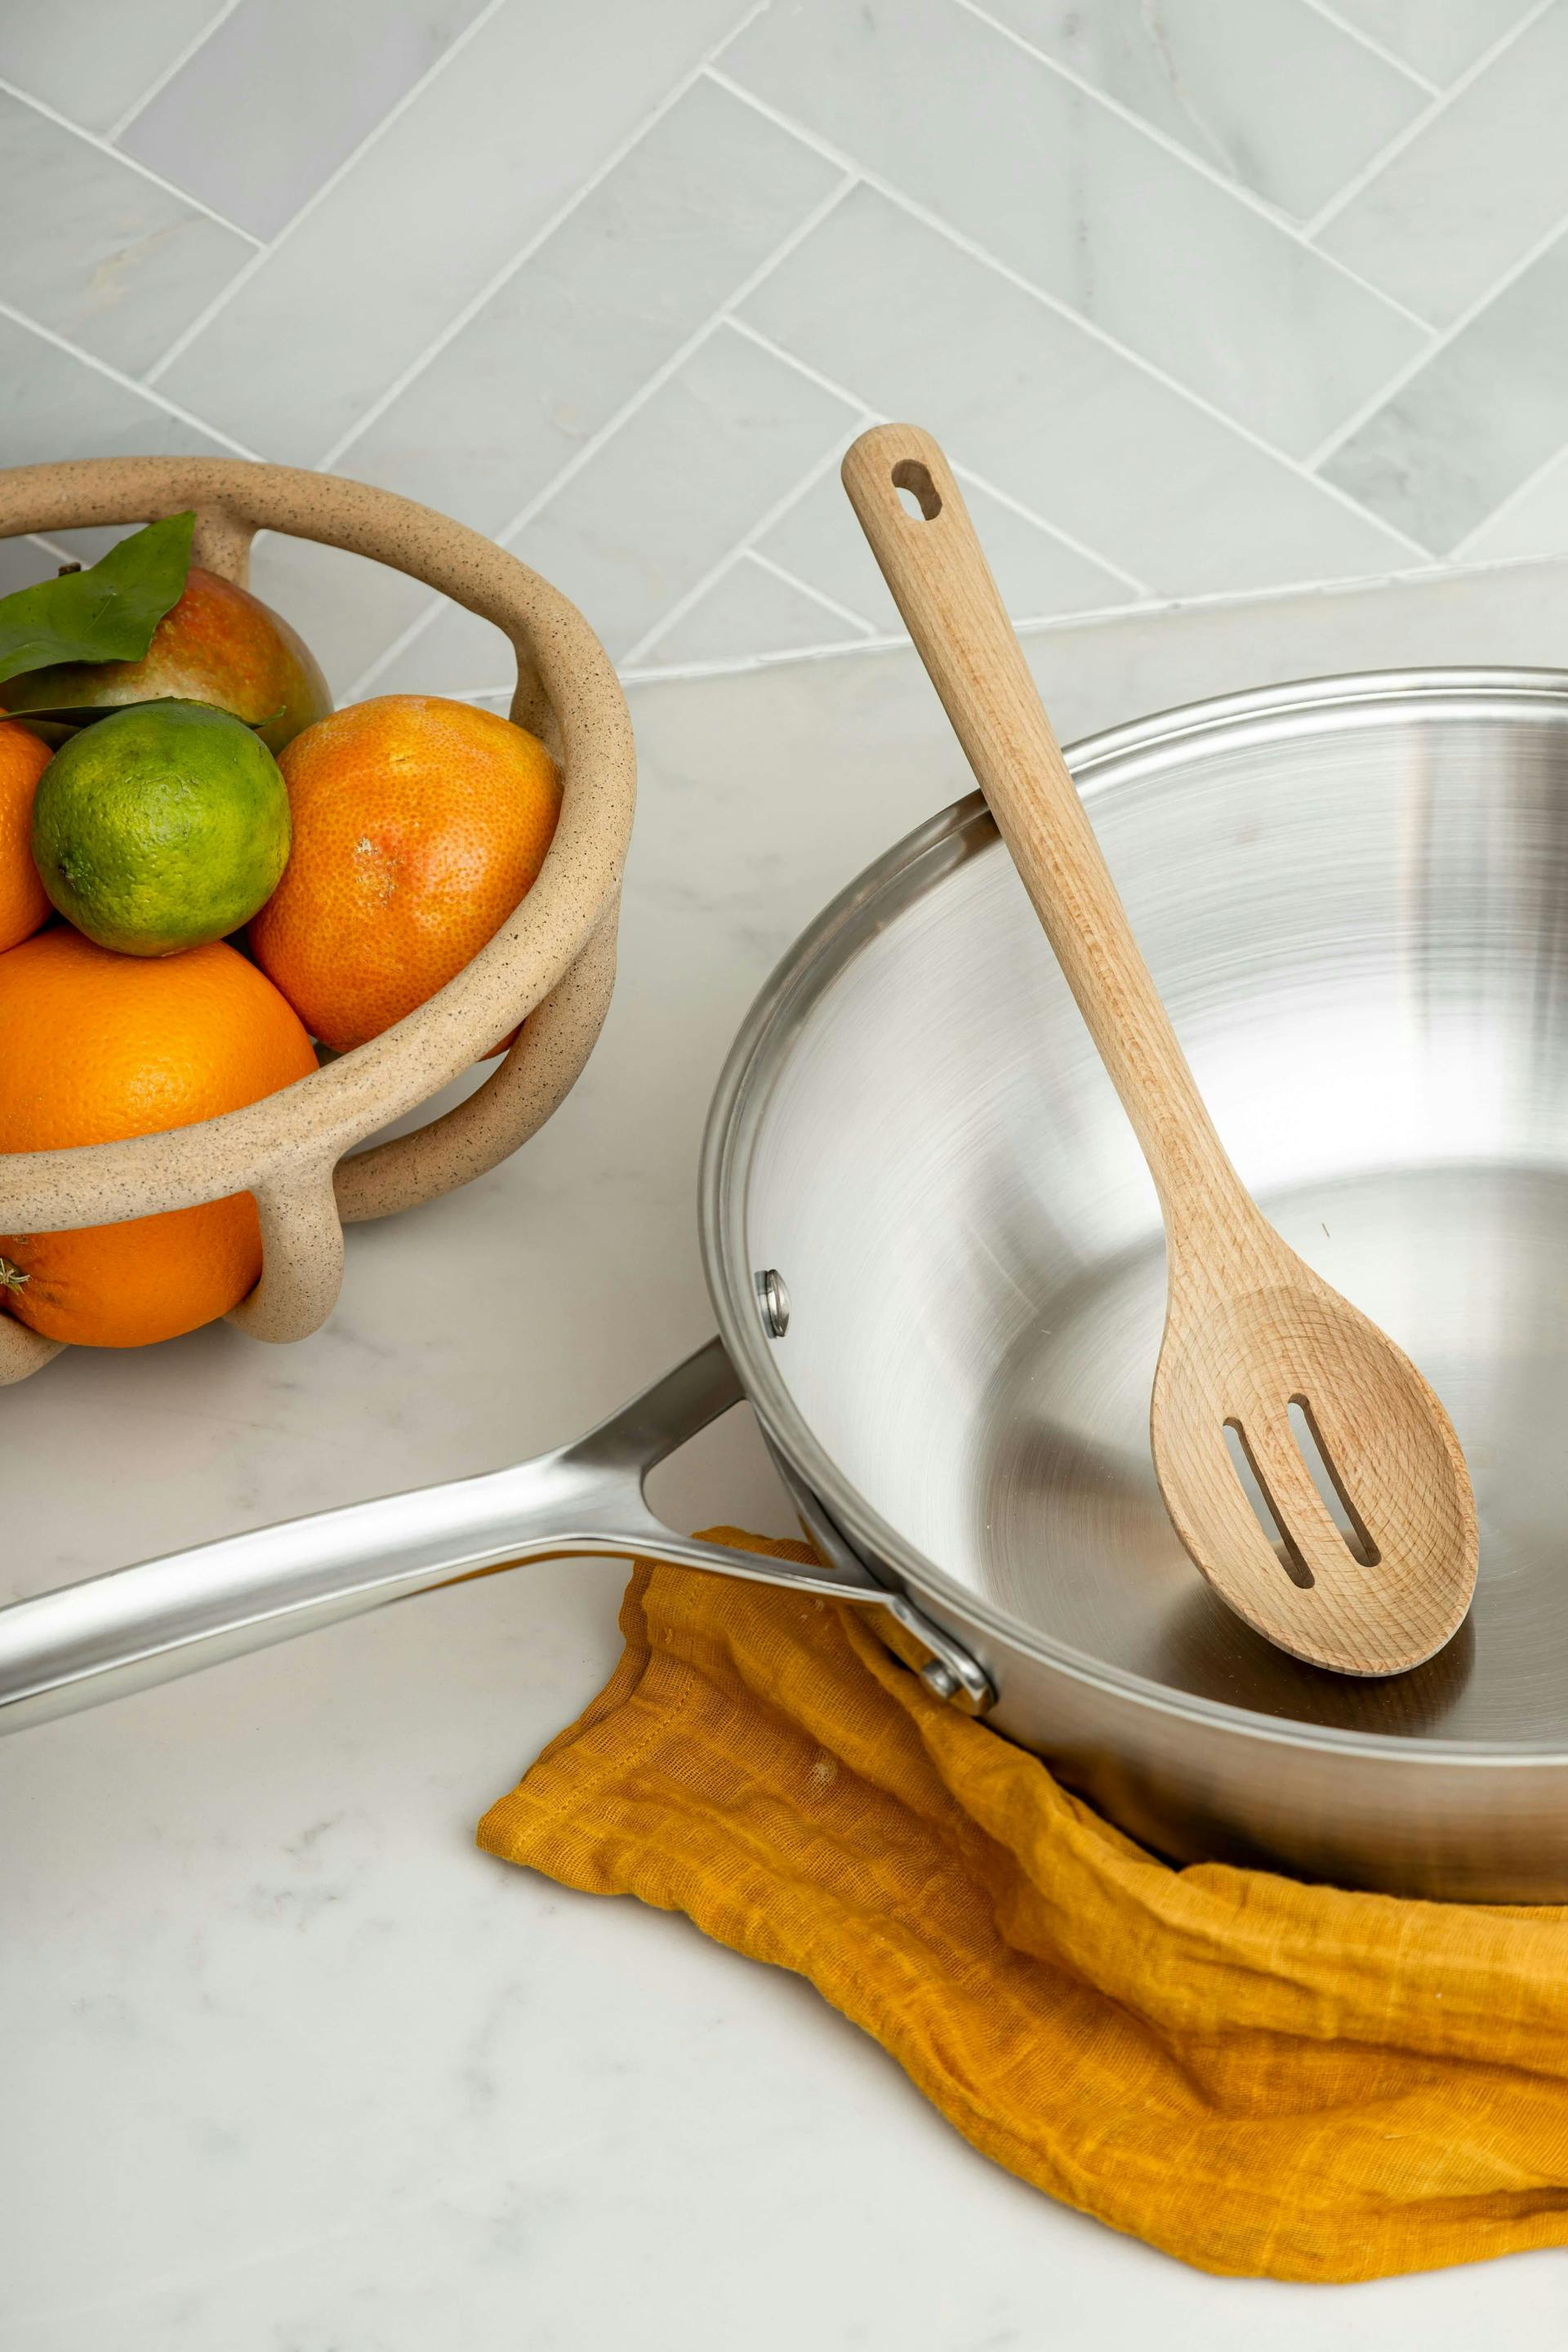 Choosing the Right Cookware: Cast Iron, Stainless Steel, or Non-Stick?